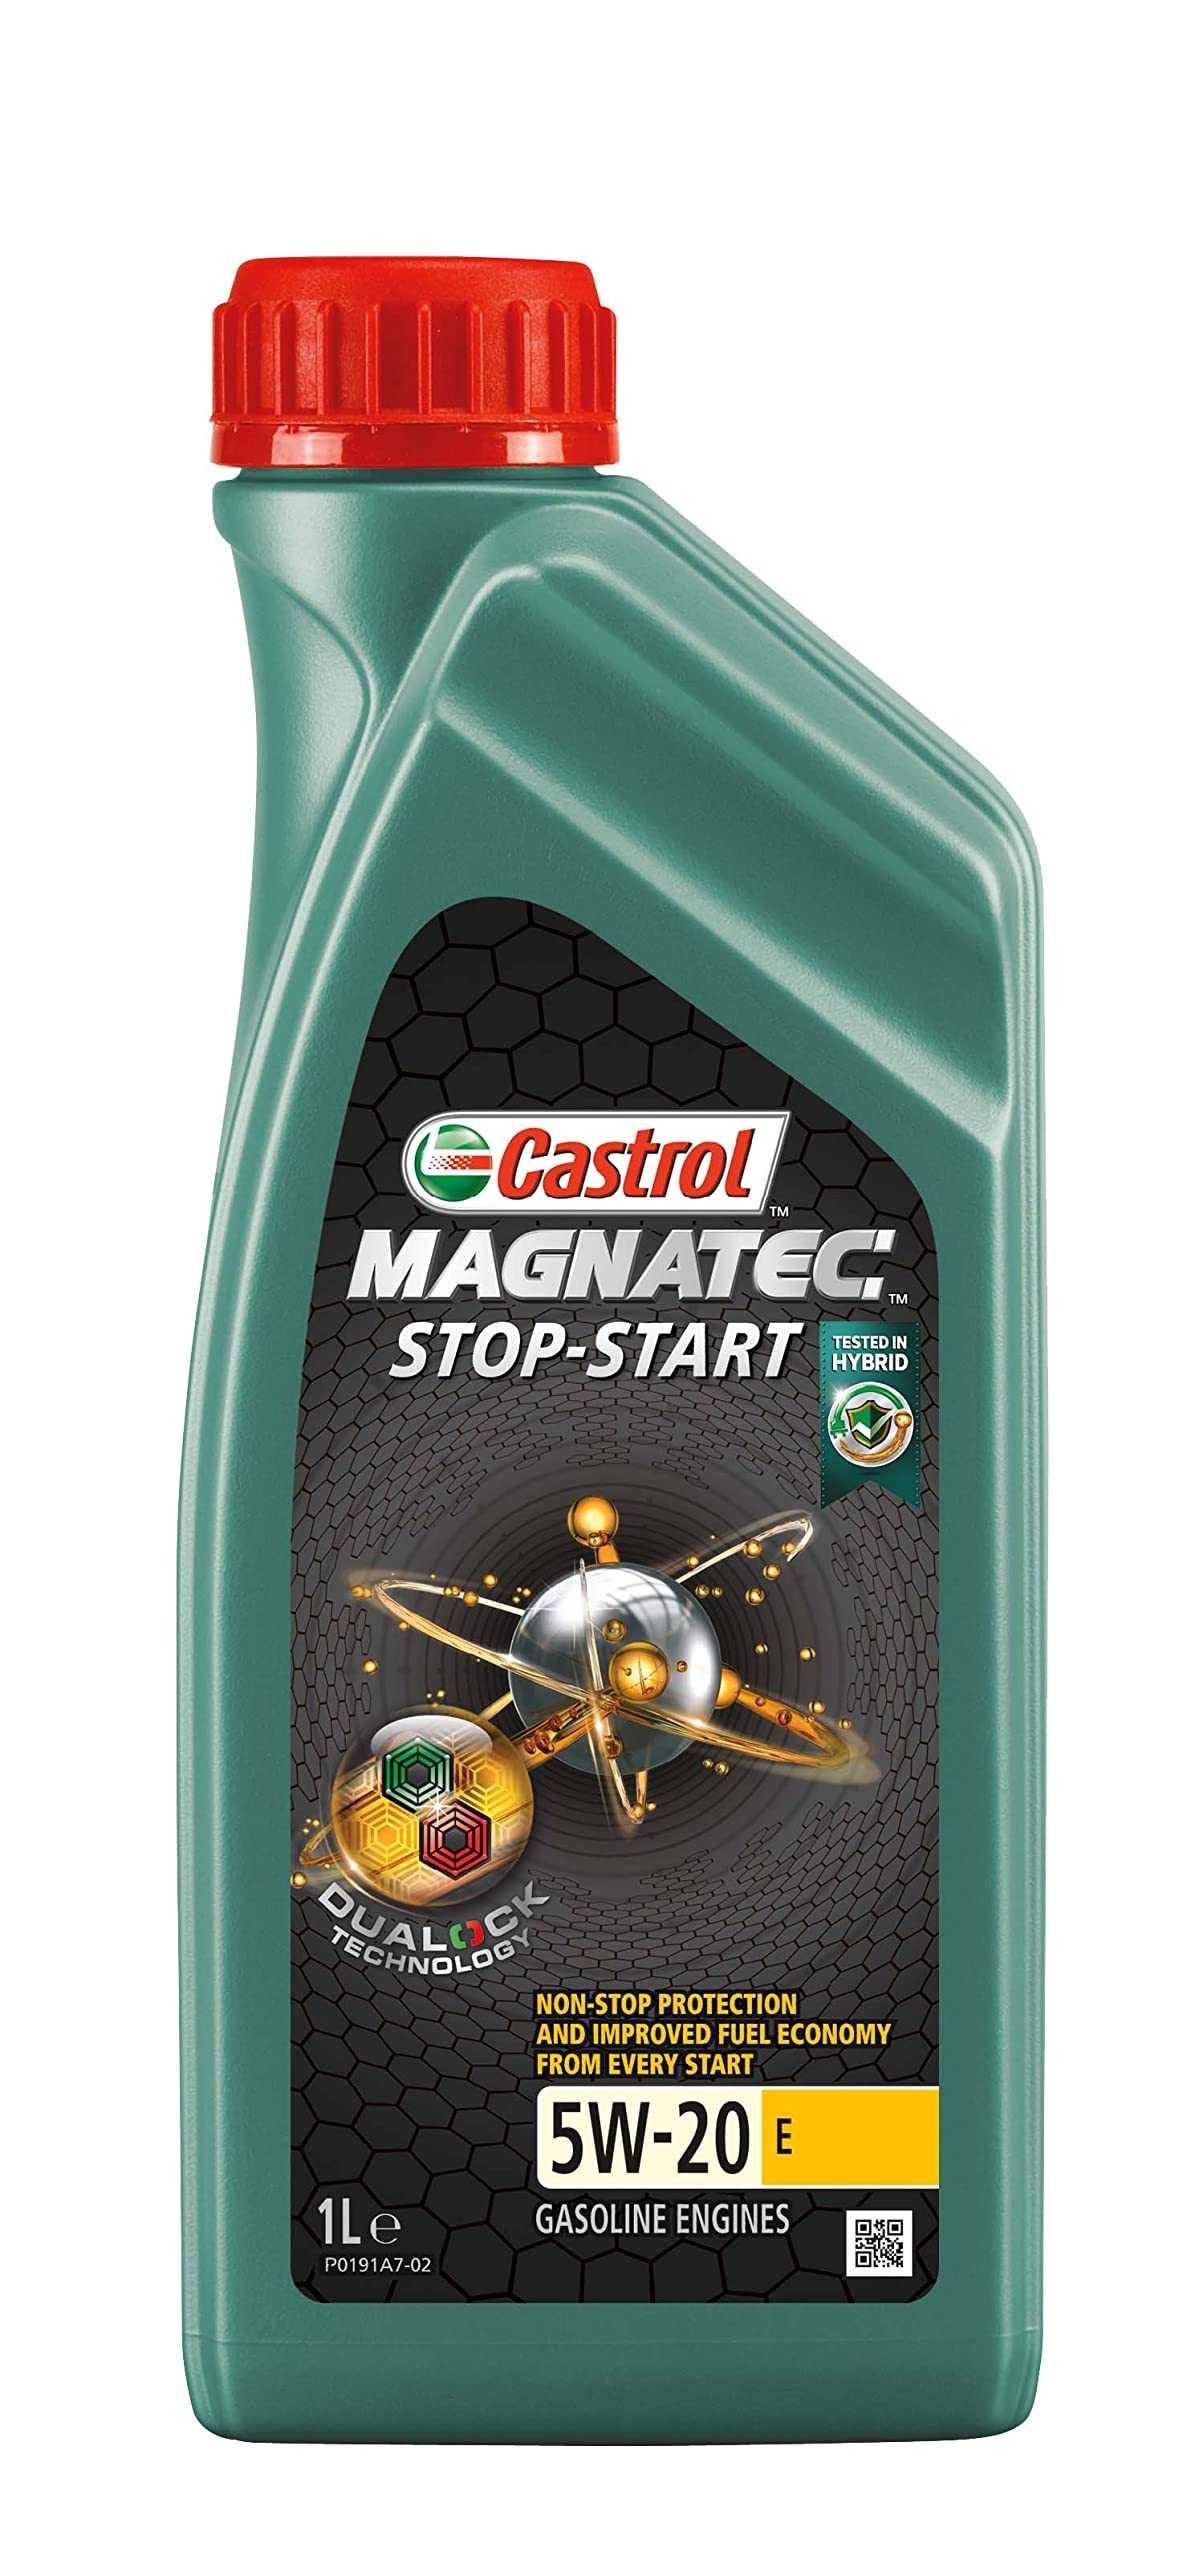 Castrol, Ford Castrol Engine Oil - 5w20 1 Litre